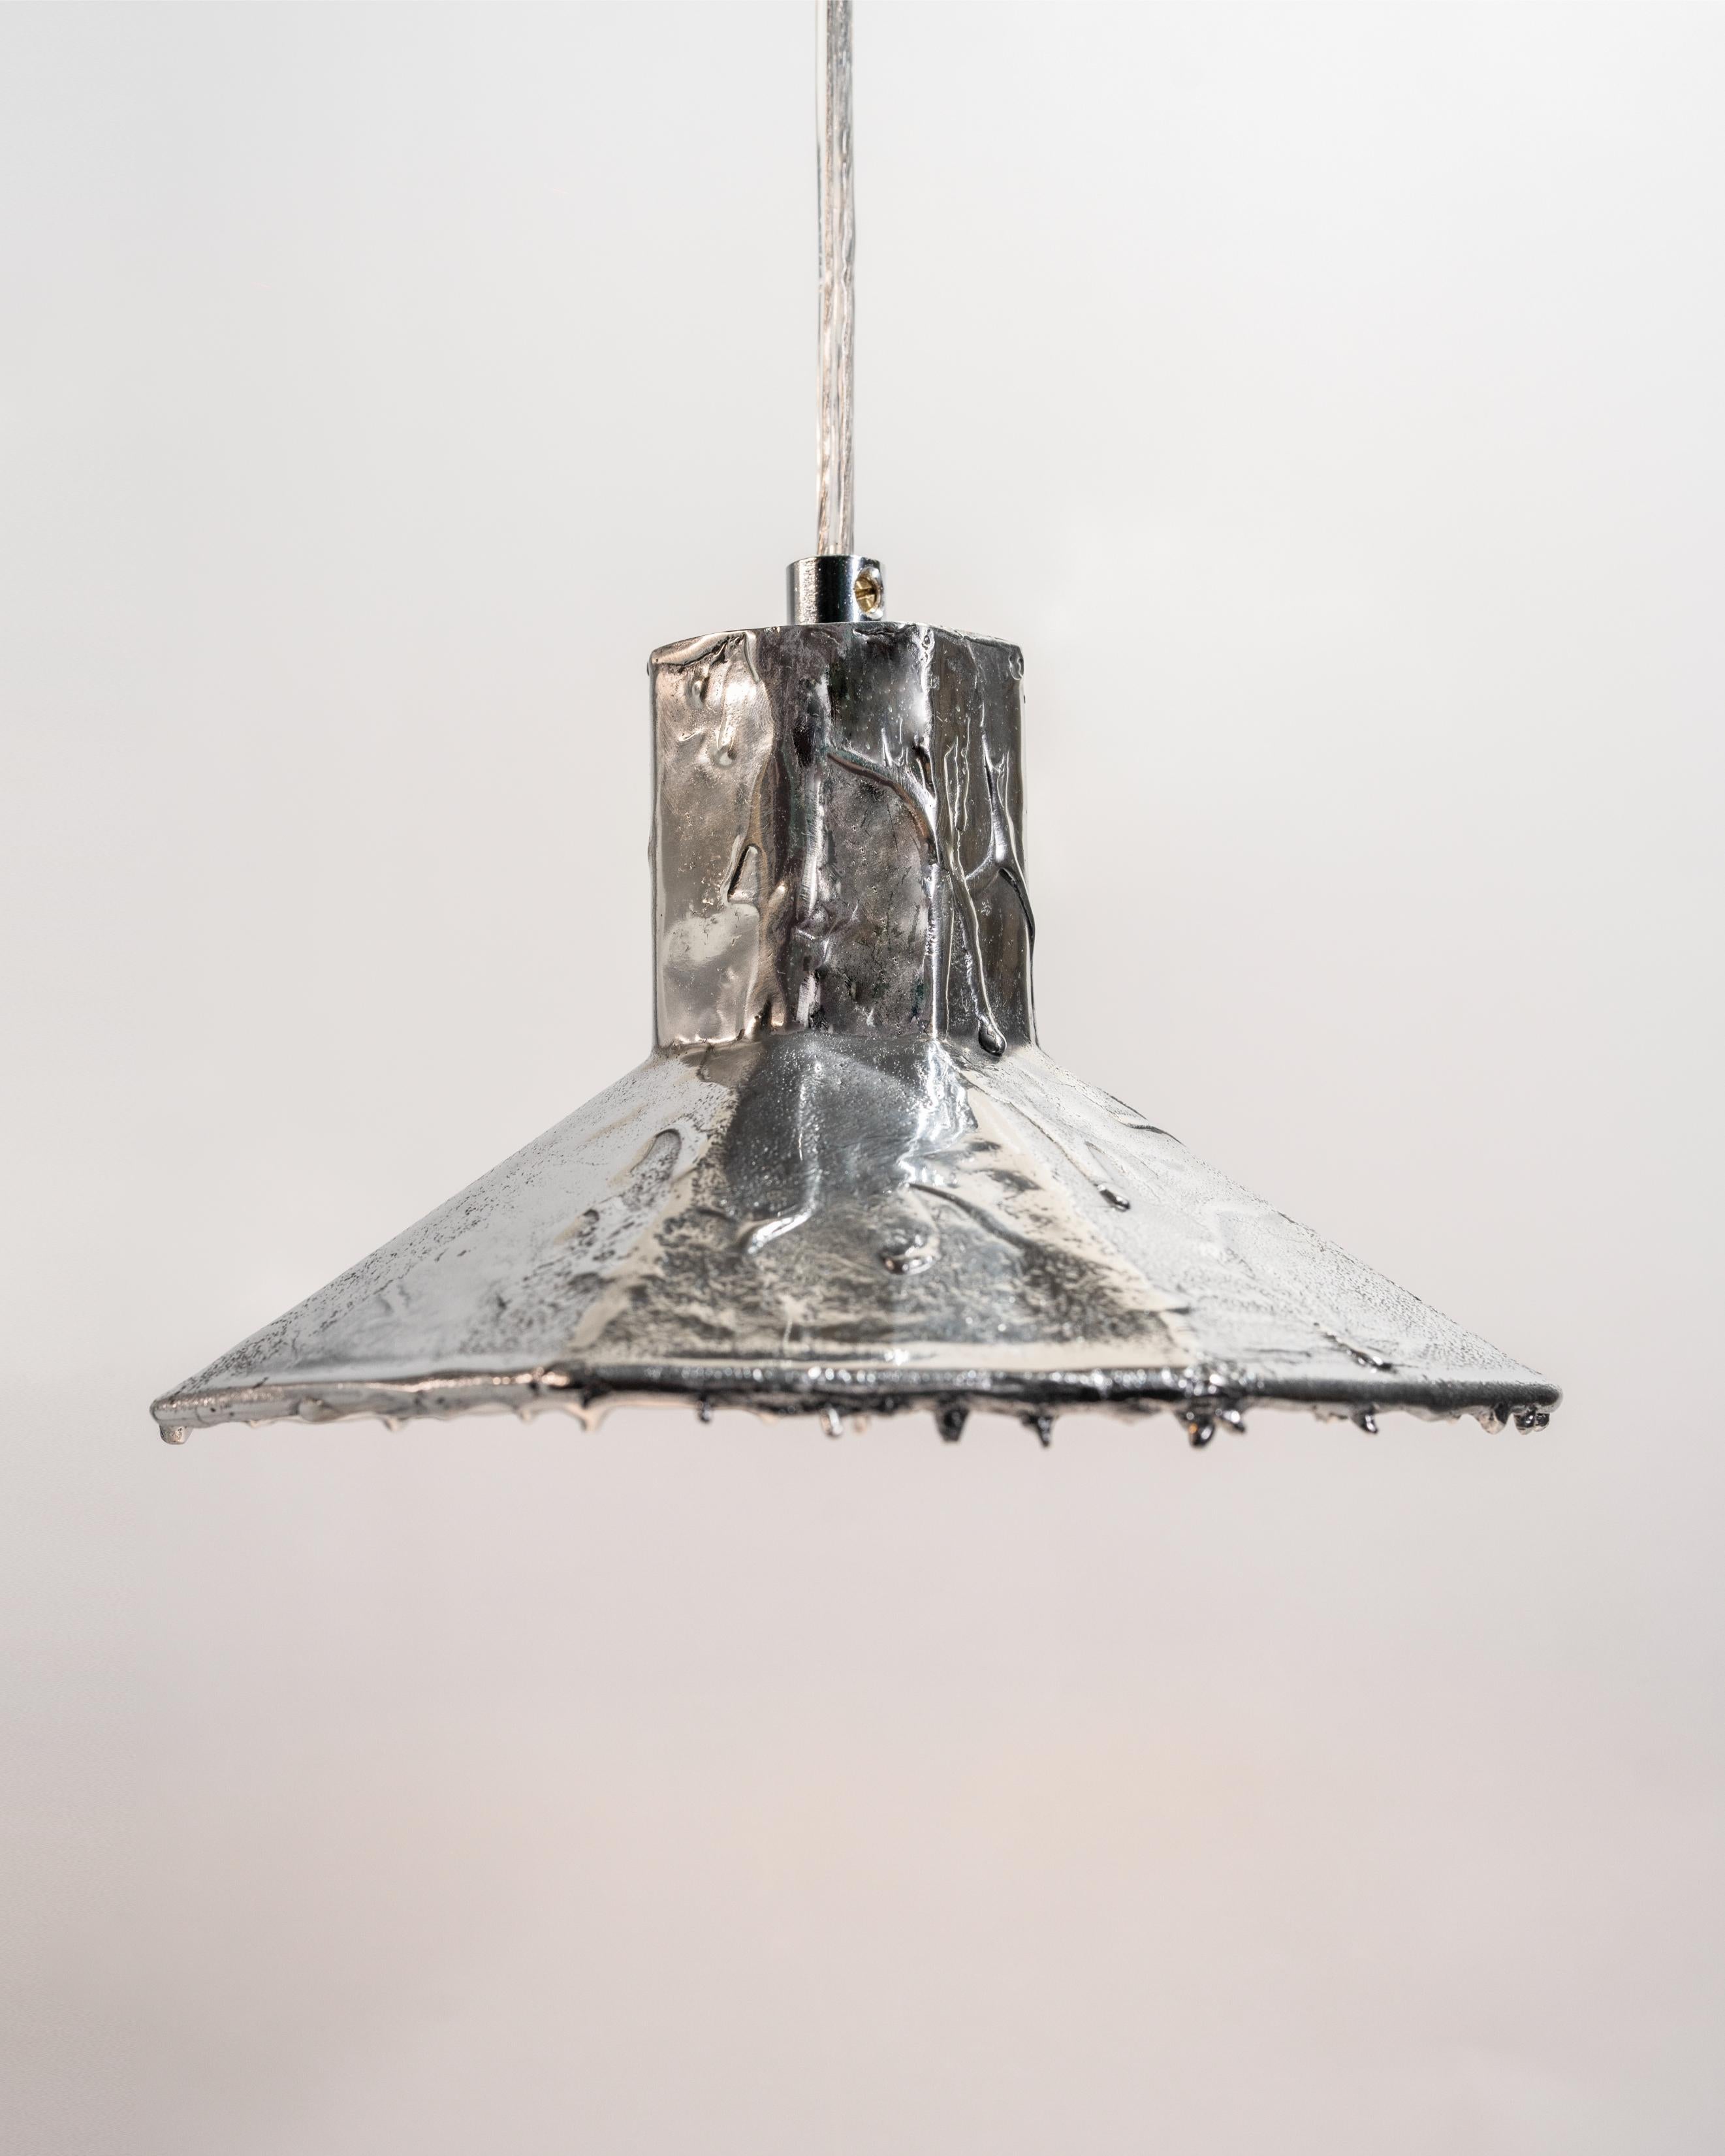 Lost Pendant 8 Lamp by Studio Birtane
PHILIA Exclusive.
Dimensions:  W 22 x D 22 x H 12 cm
Materials: Cast Aluminium
Cast Bronze version and Polished or Patinated finishes are also available.

All our lamps can be wired according to each country. If